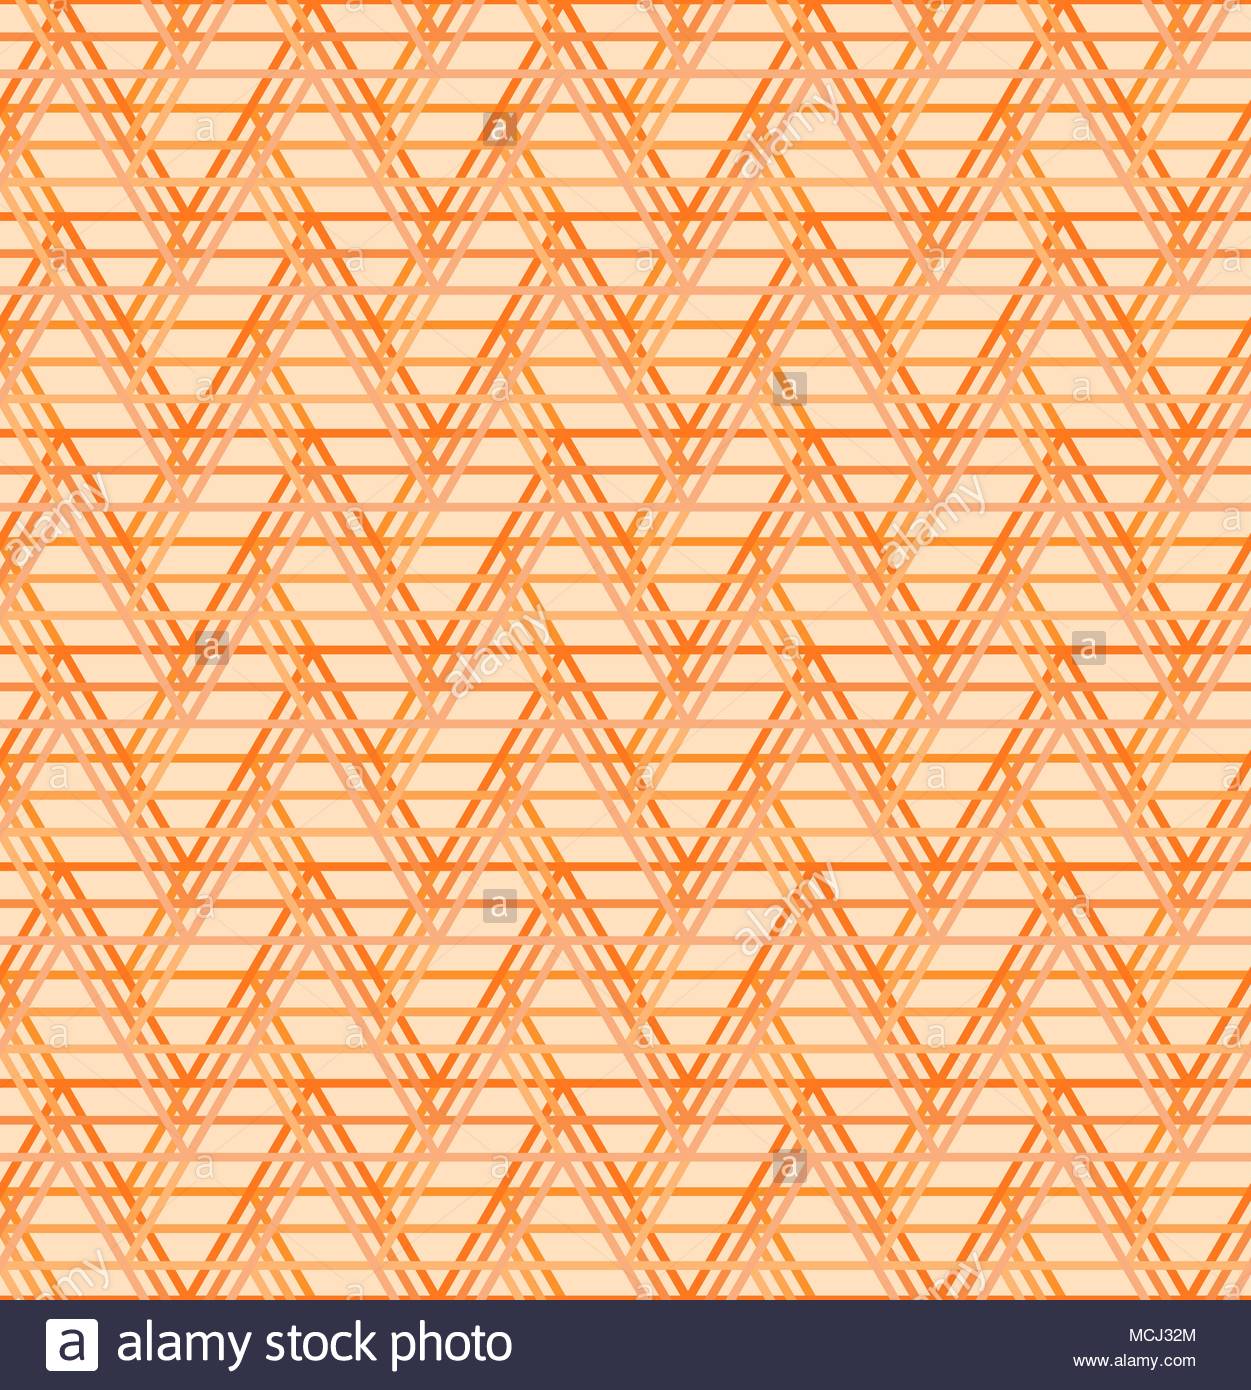 Seamless abstract geometric pattern orange trianges background